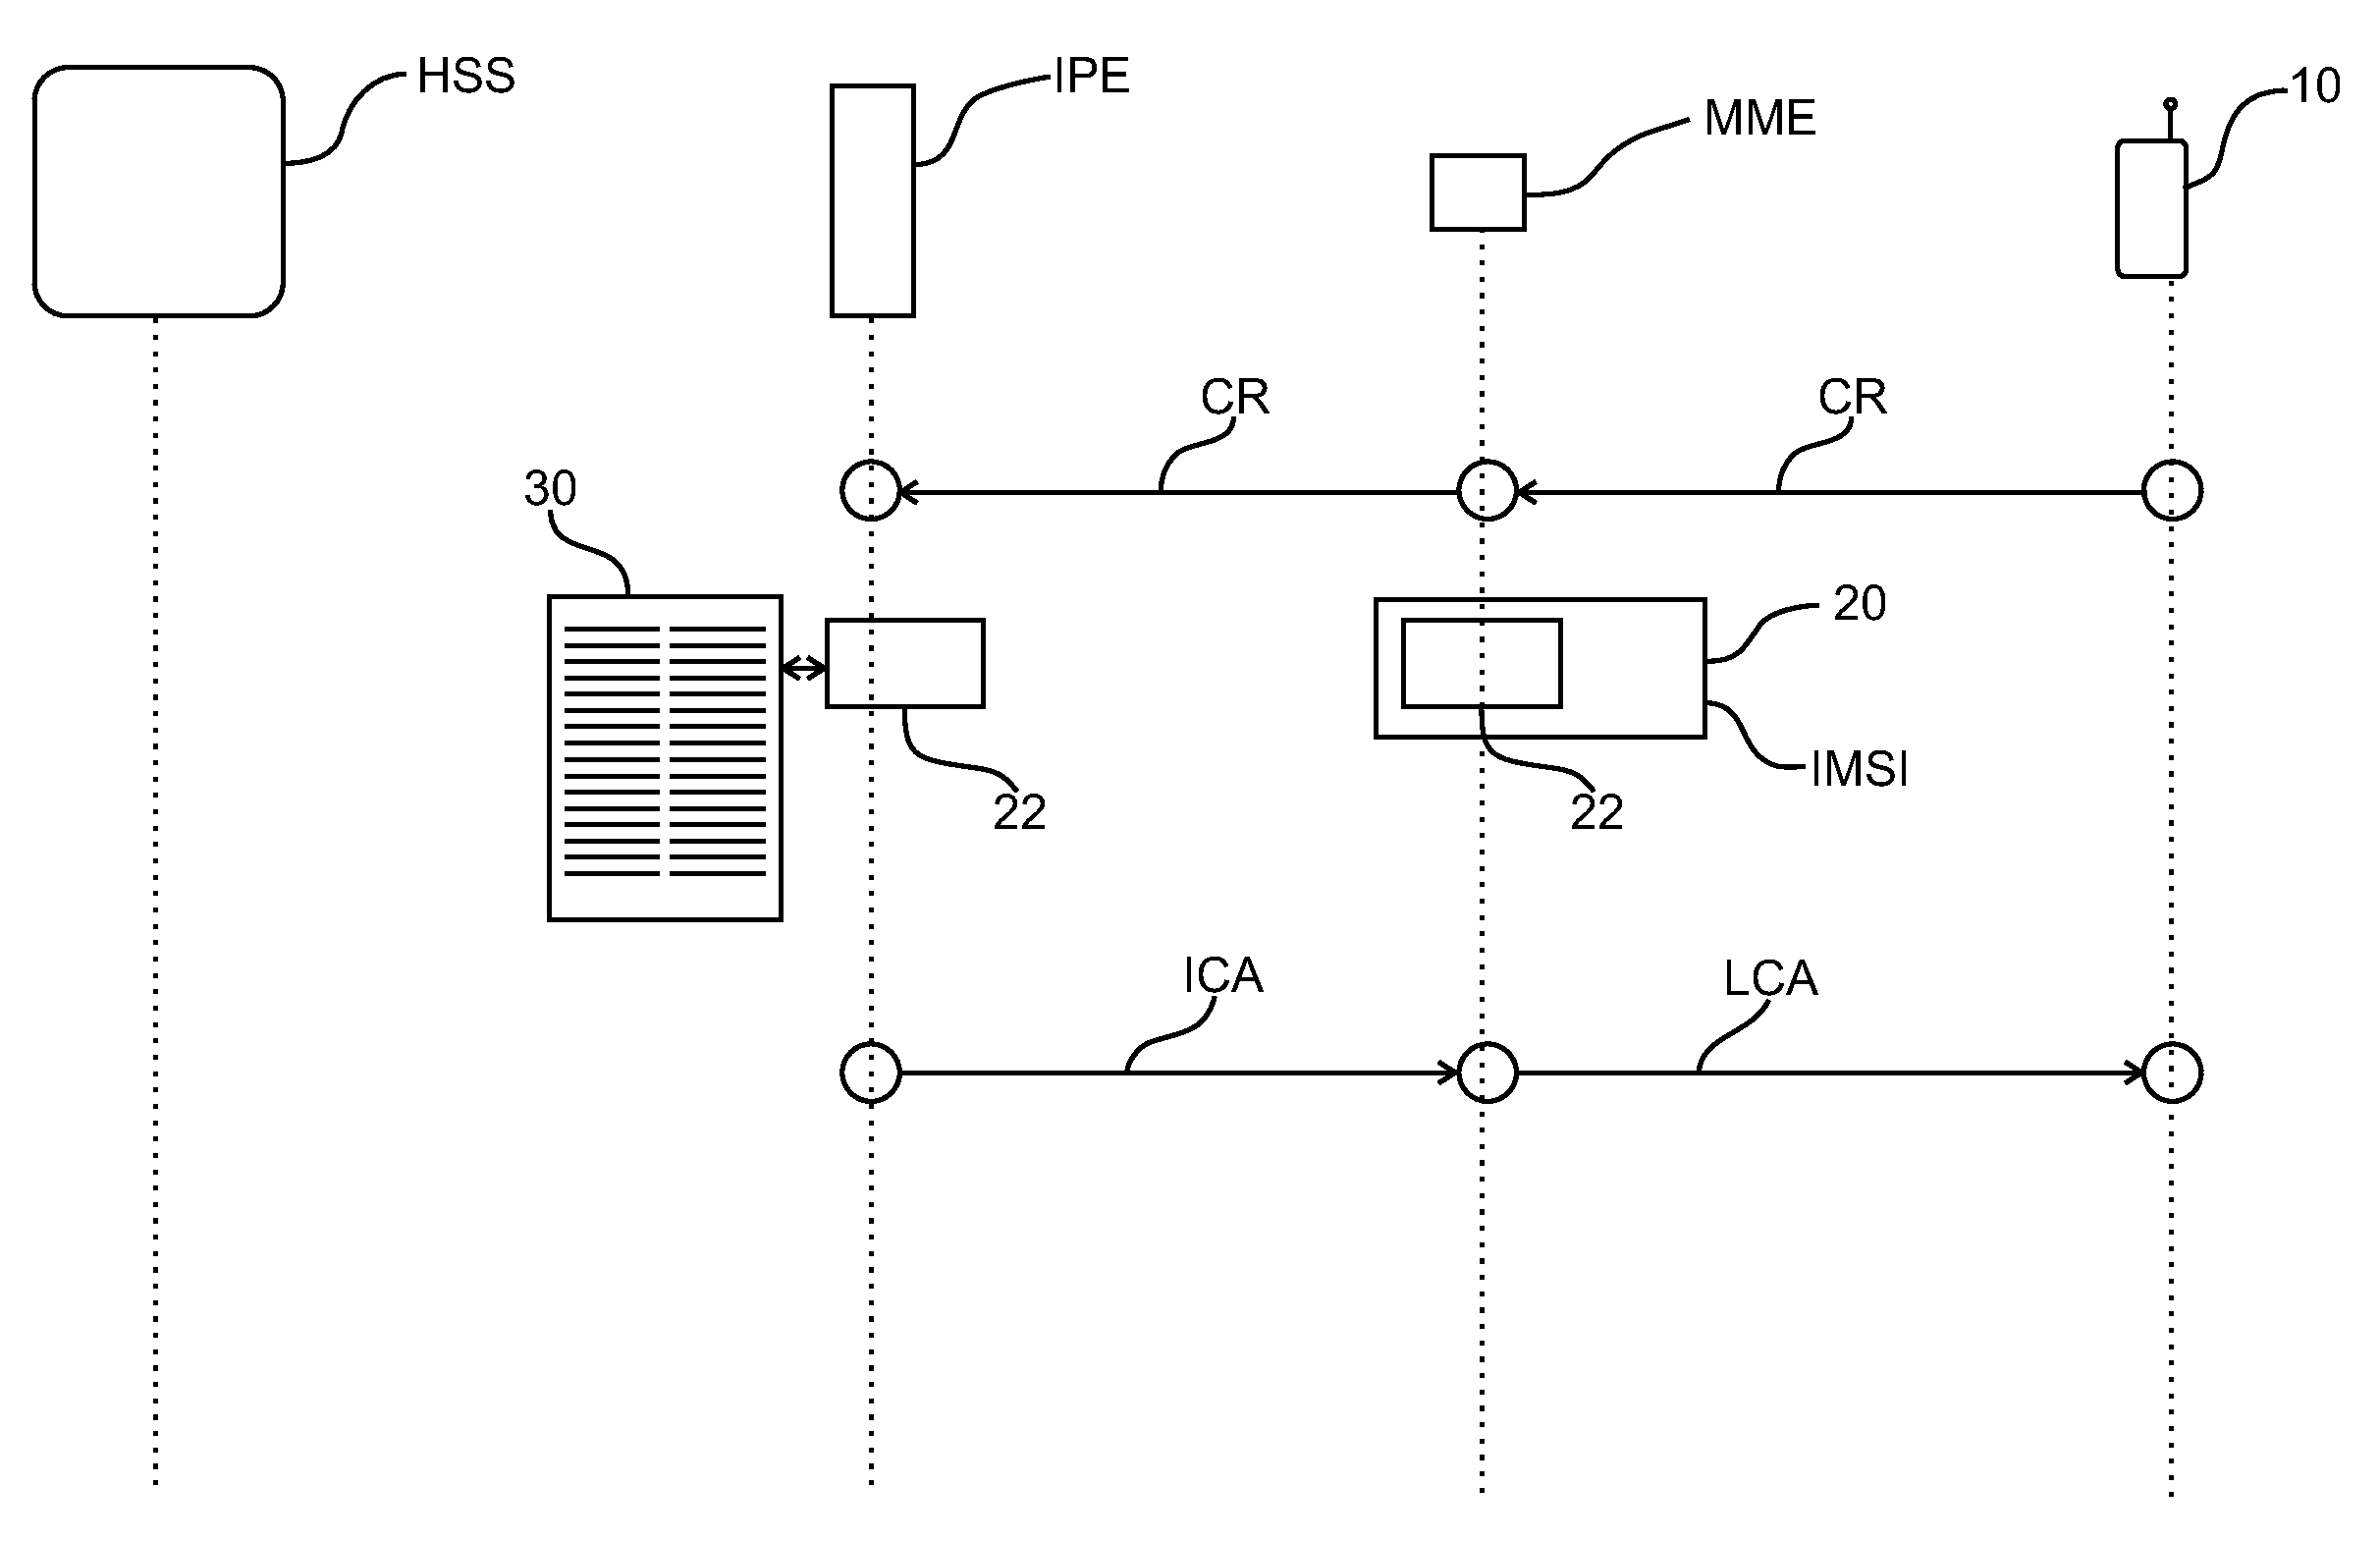 Verification method for the verification of a connection request from a roaming mobile entity